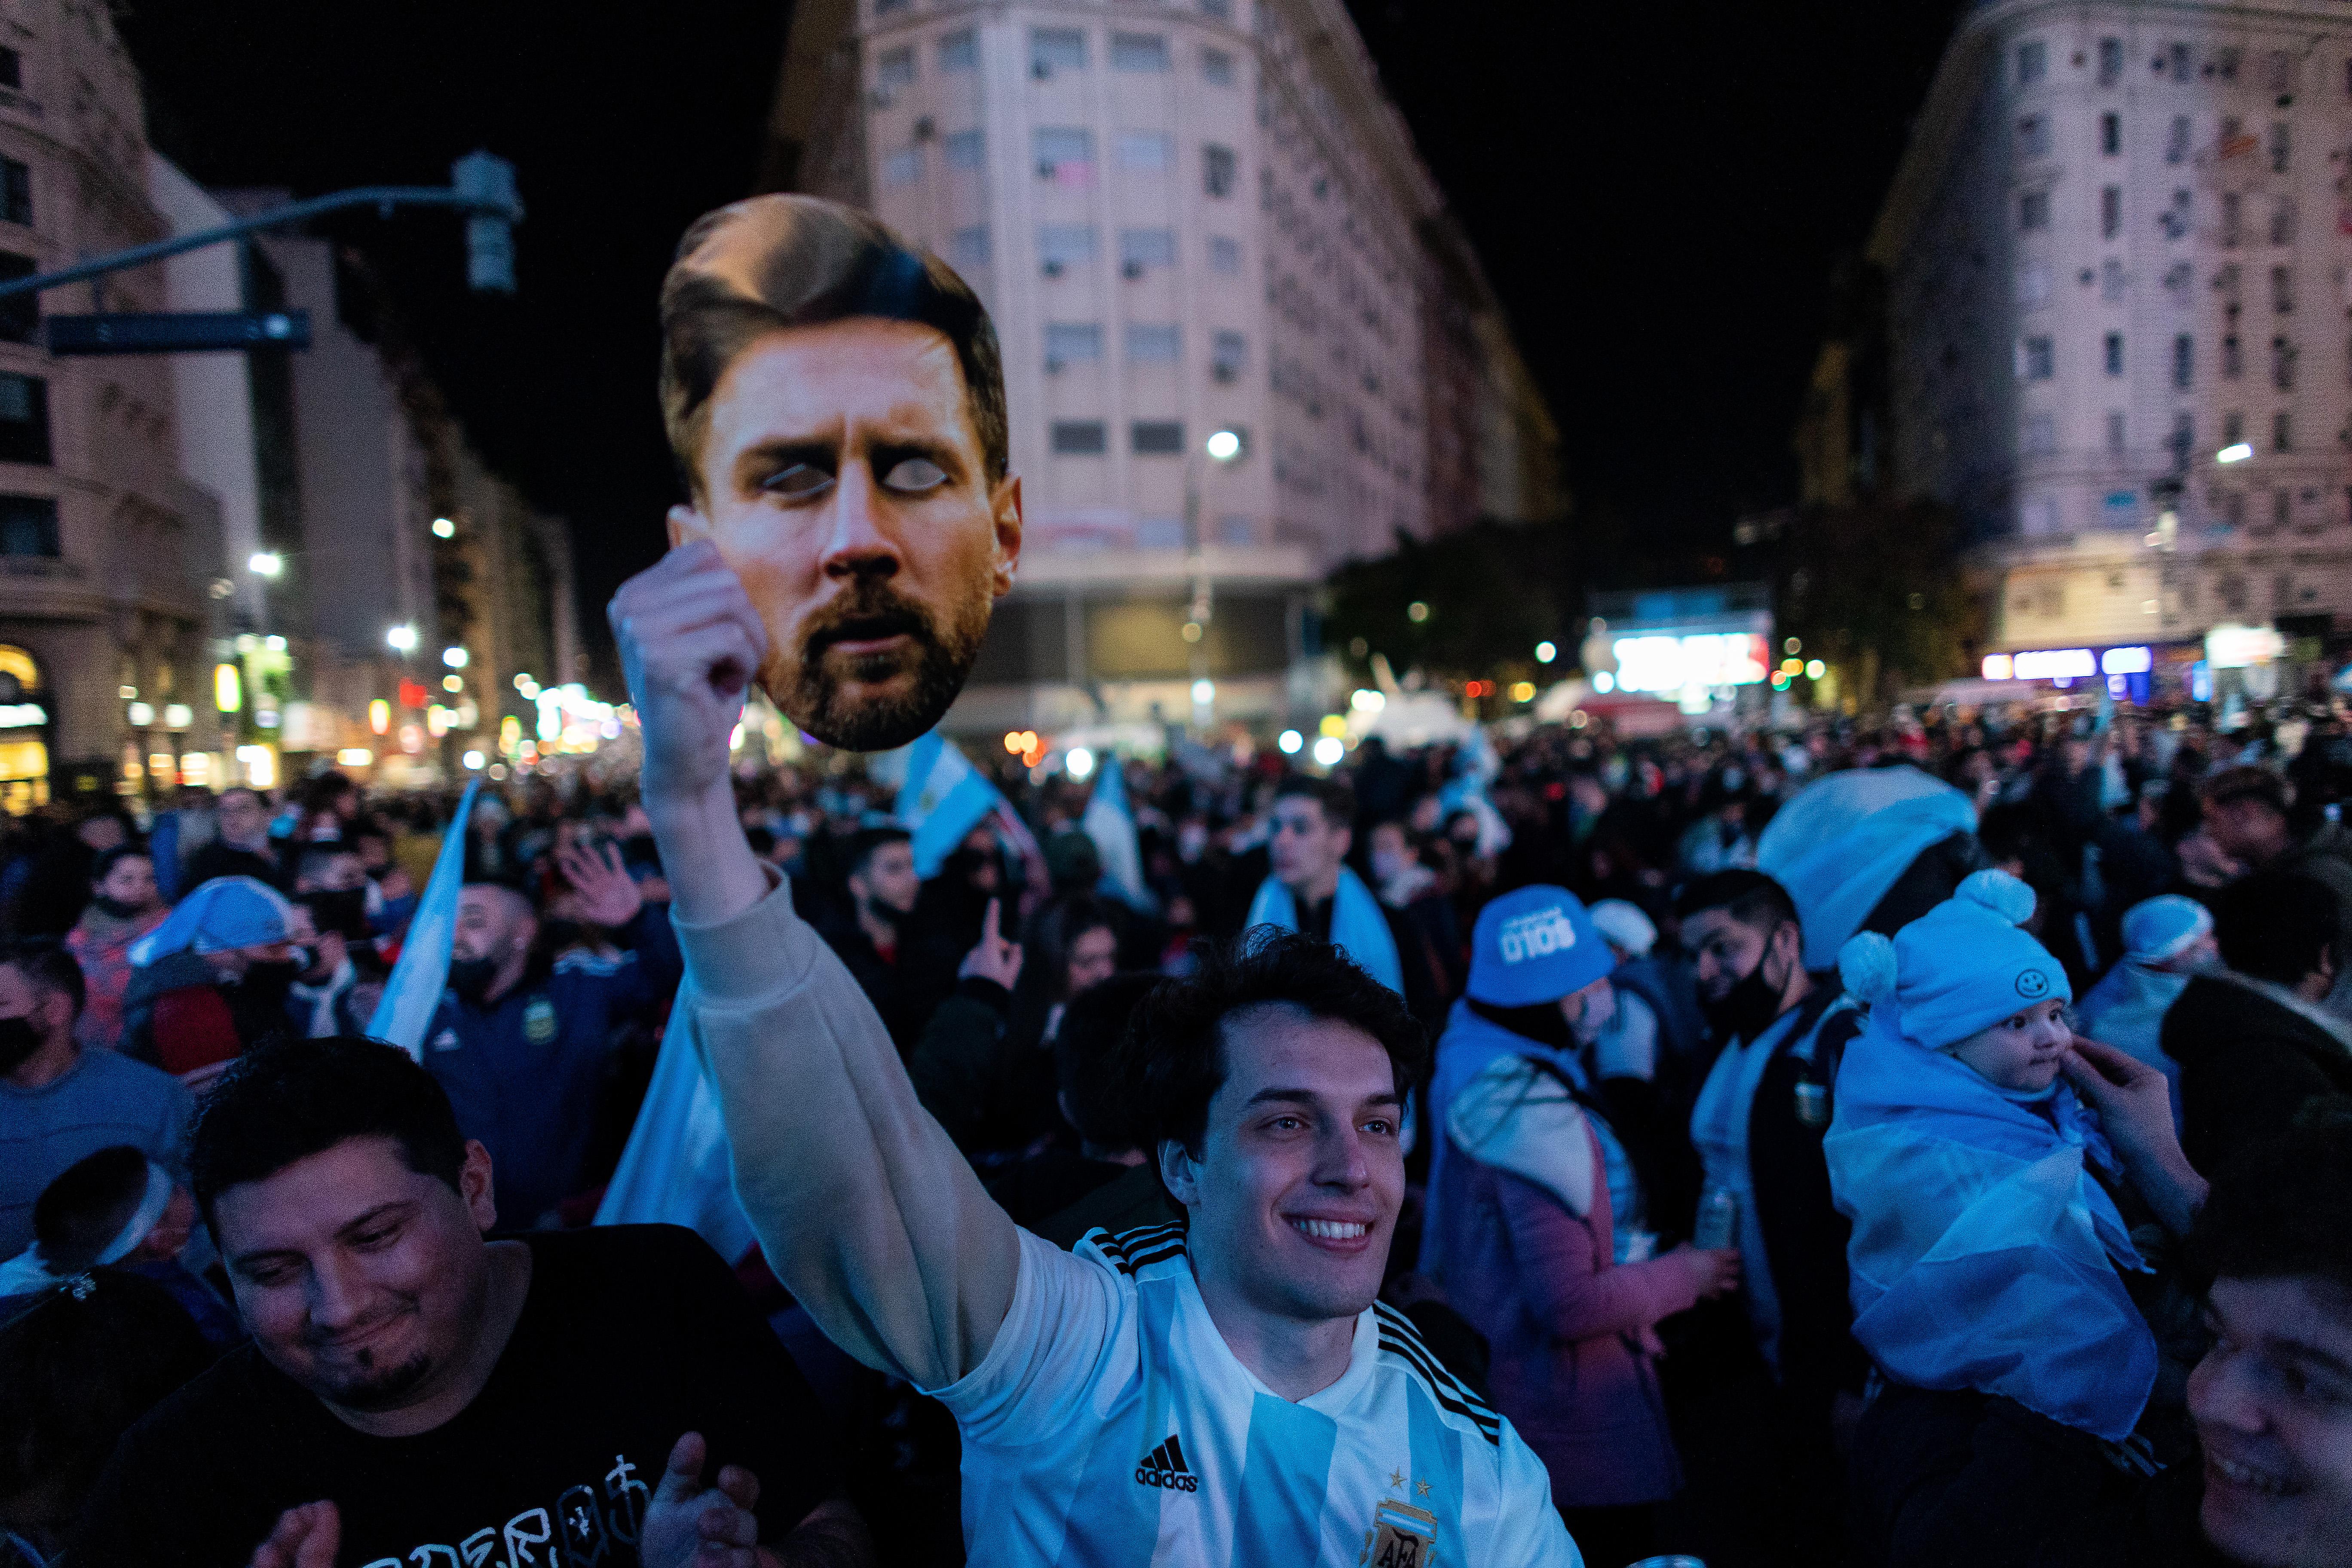 An Argentine fan holds a picture of Lionel Messi as fans gather to celebrate at the Obelisk after their team won the Copa America final against Brazil on July 10, 2021 in Buenos Aires, Argentina.